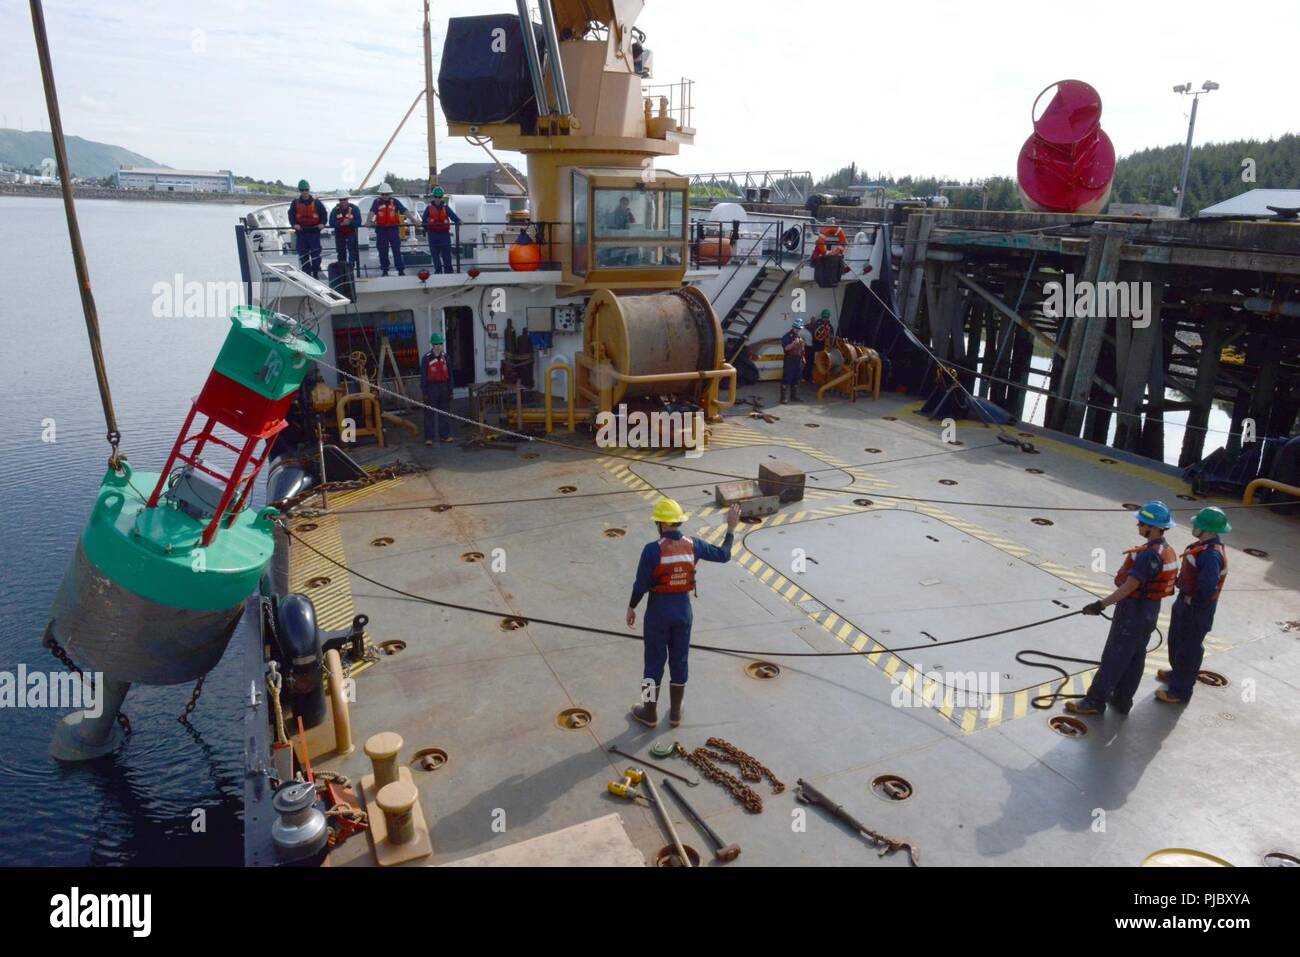 Coast Guard Cutter SPAR crew members conduct a training buoy evolution for qualification purposes on the SPAR's buoy deck in Kodiak, Alaska, July 17, 2018. A buoy evolution can take from 30 minutes to two hours, depending on the level of maintenance required. U.S. Coast Guard Stock Photo